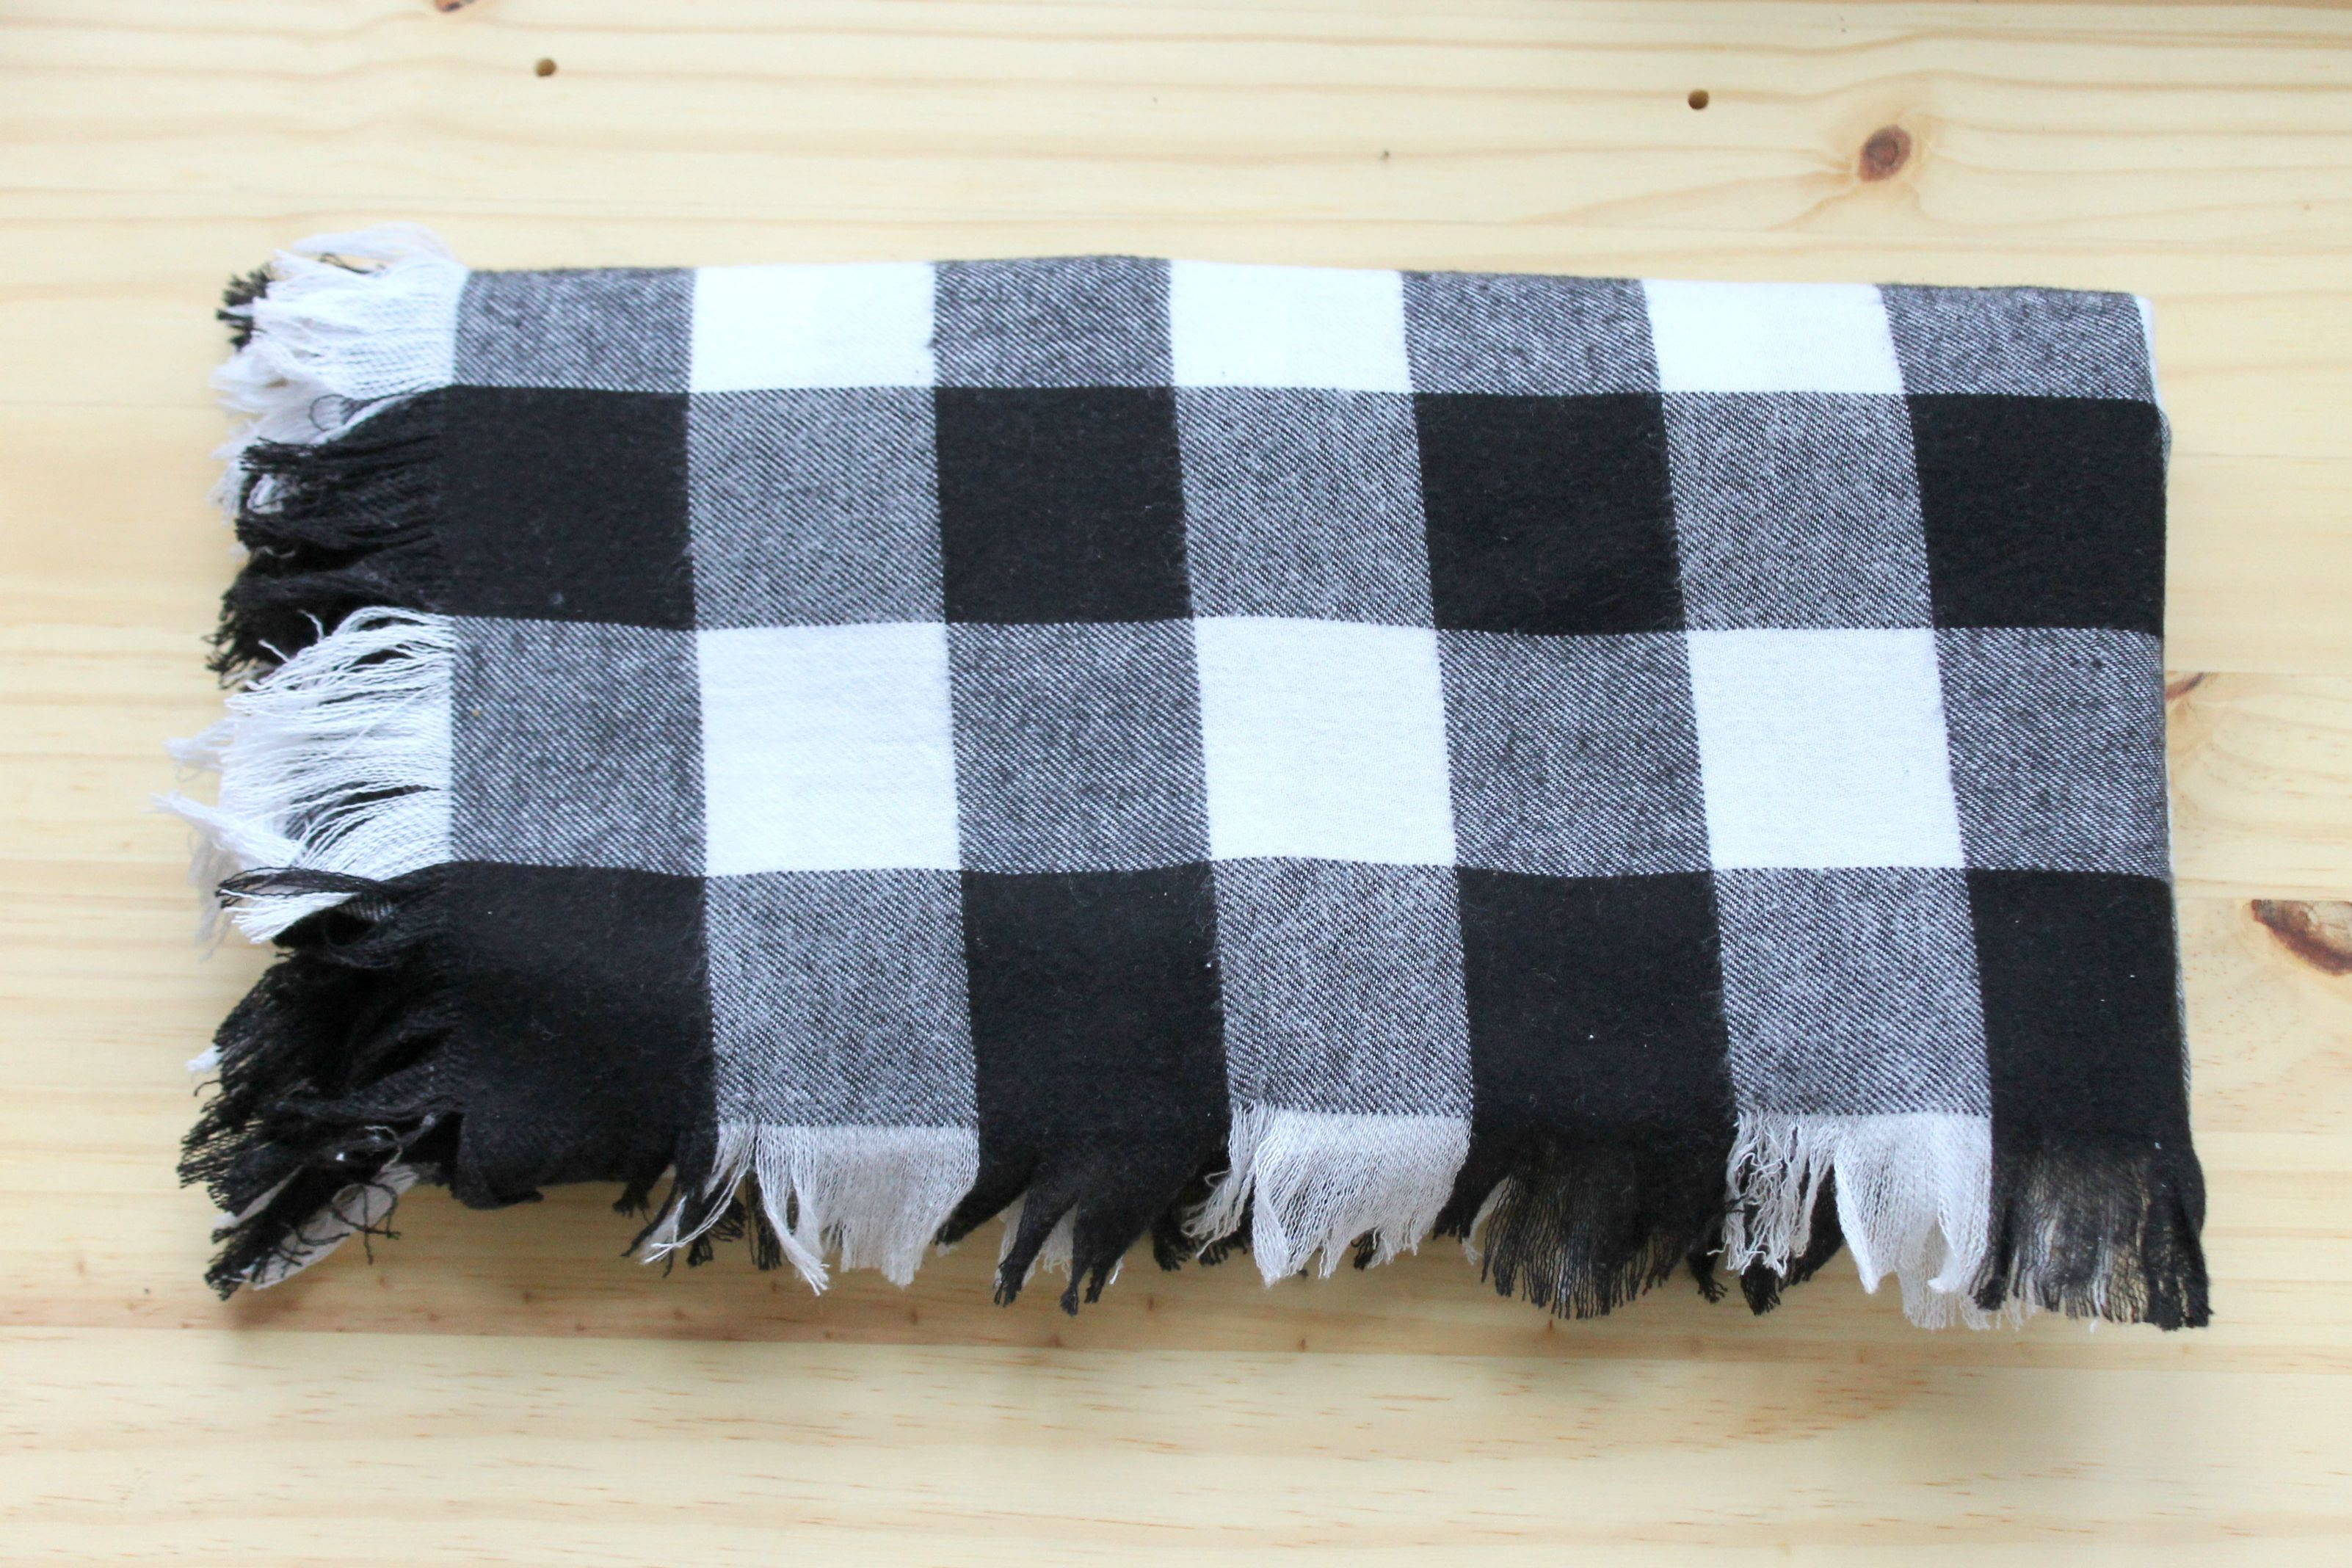 12 Days of Handmade Holiday Gifts! This no sew scarf is so easy to make and I love the buffalo plaid.